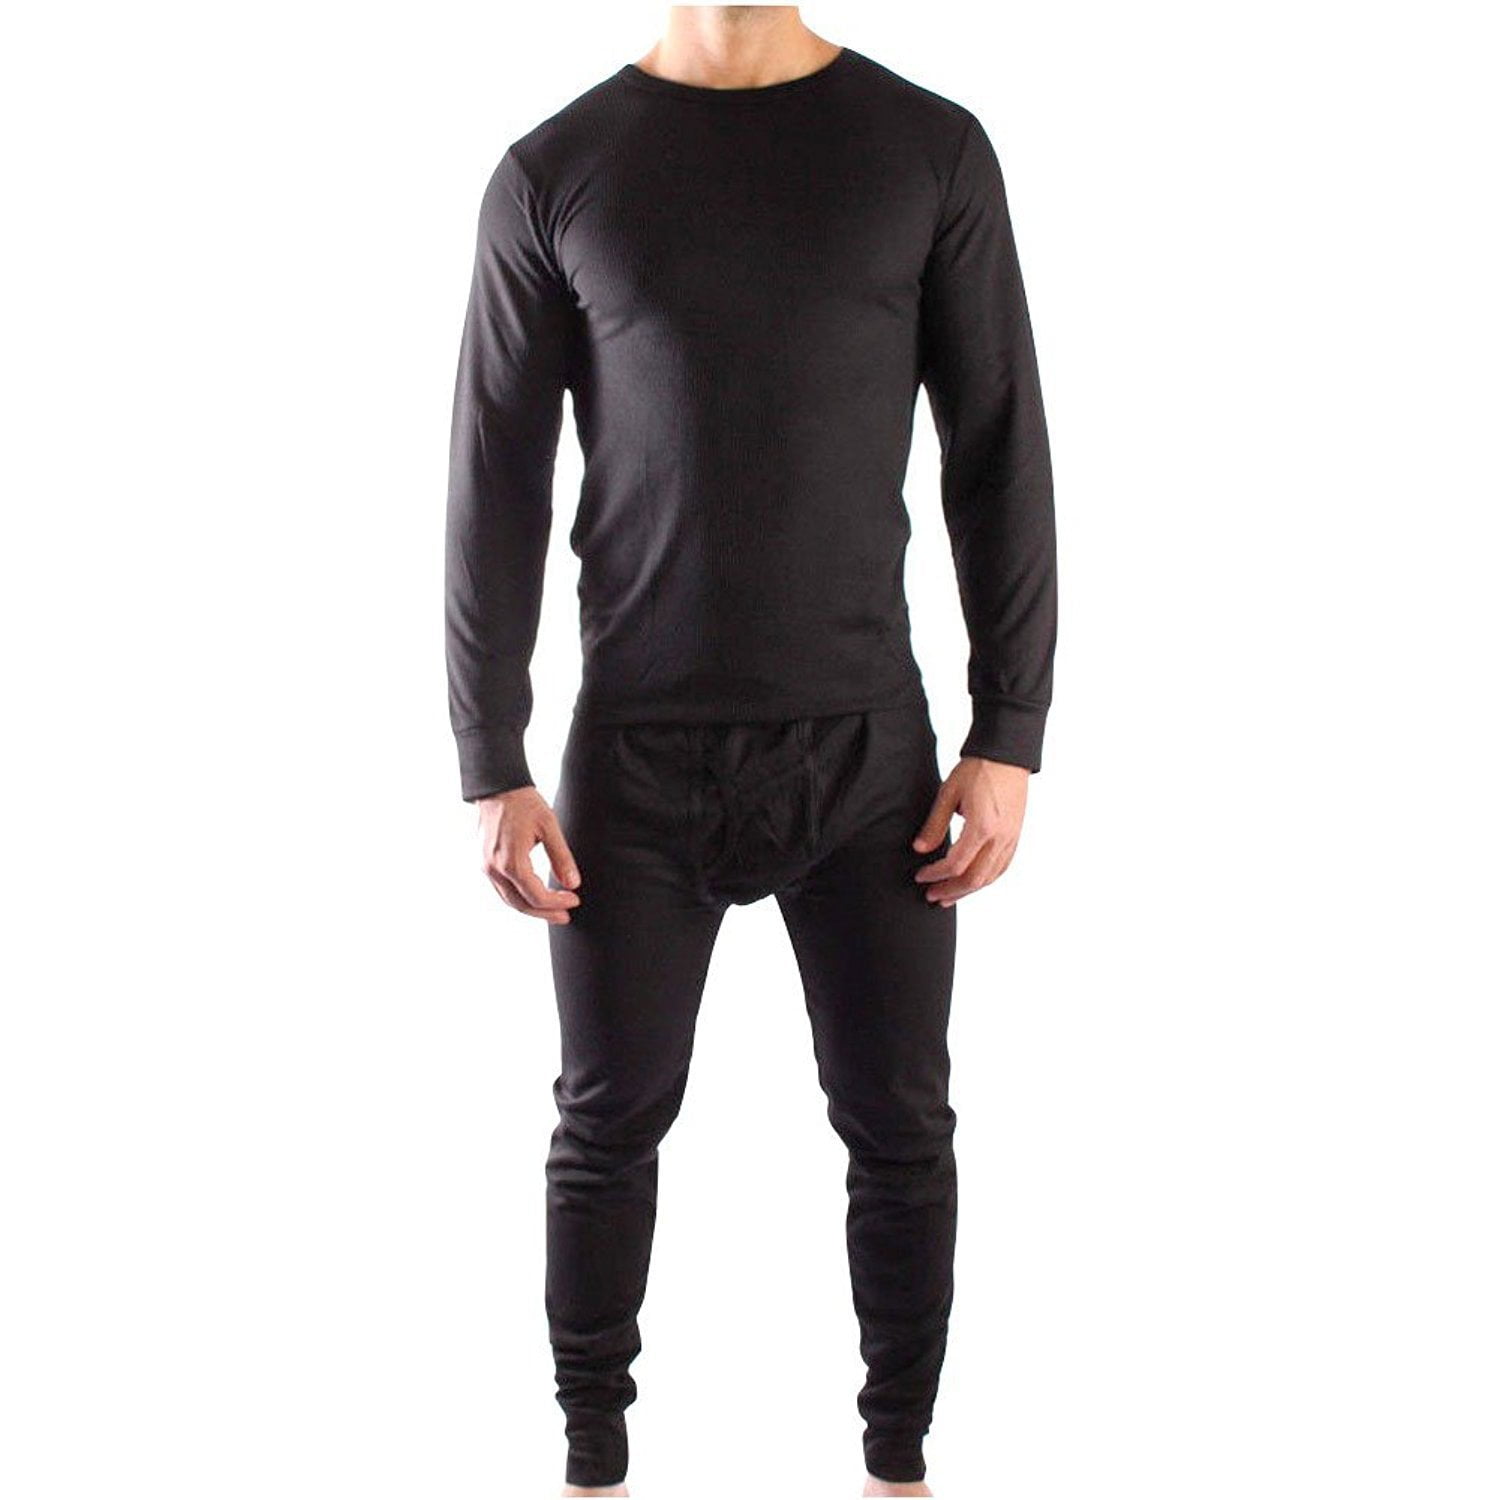 High Quality Medium Thermal Long Johns Trouser for Men’s-Charcoal 